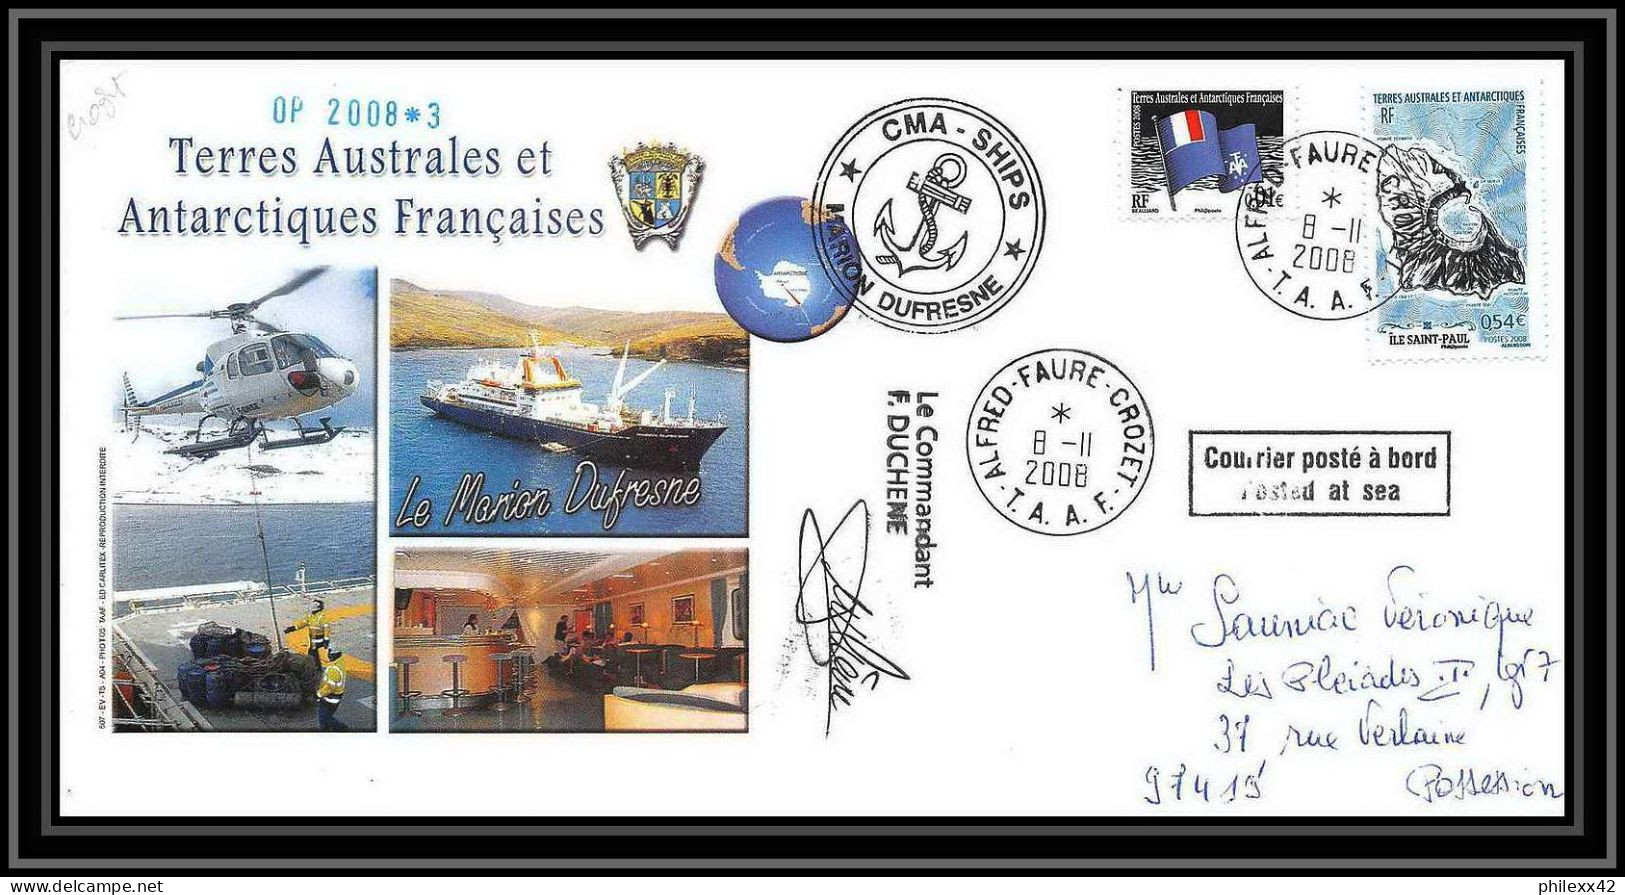 2845 ANTARCTIC Terres Australes TAAF Helilagon Lettre Cover Dufresne Signé Signed Op 2008/3 Crozet 8/11/2008 N°506 - Helicópteros